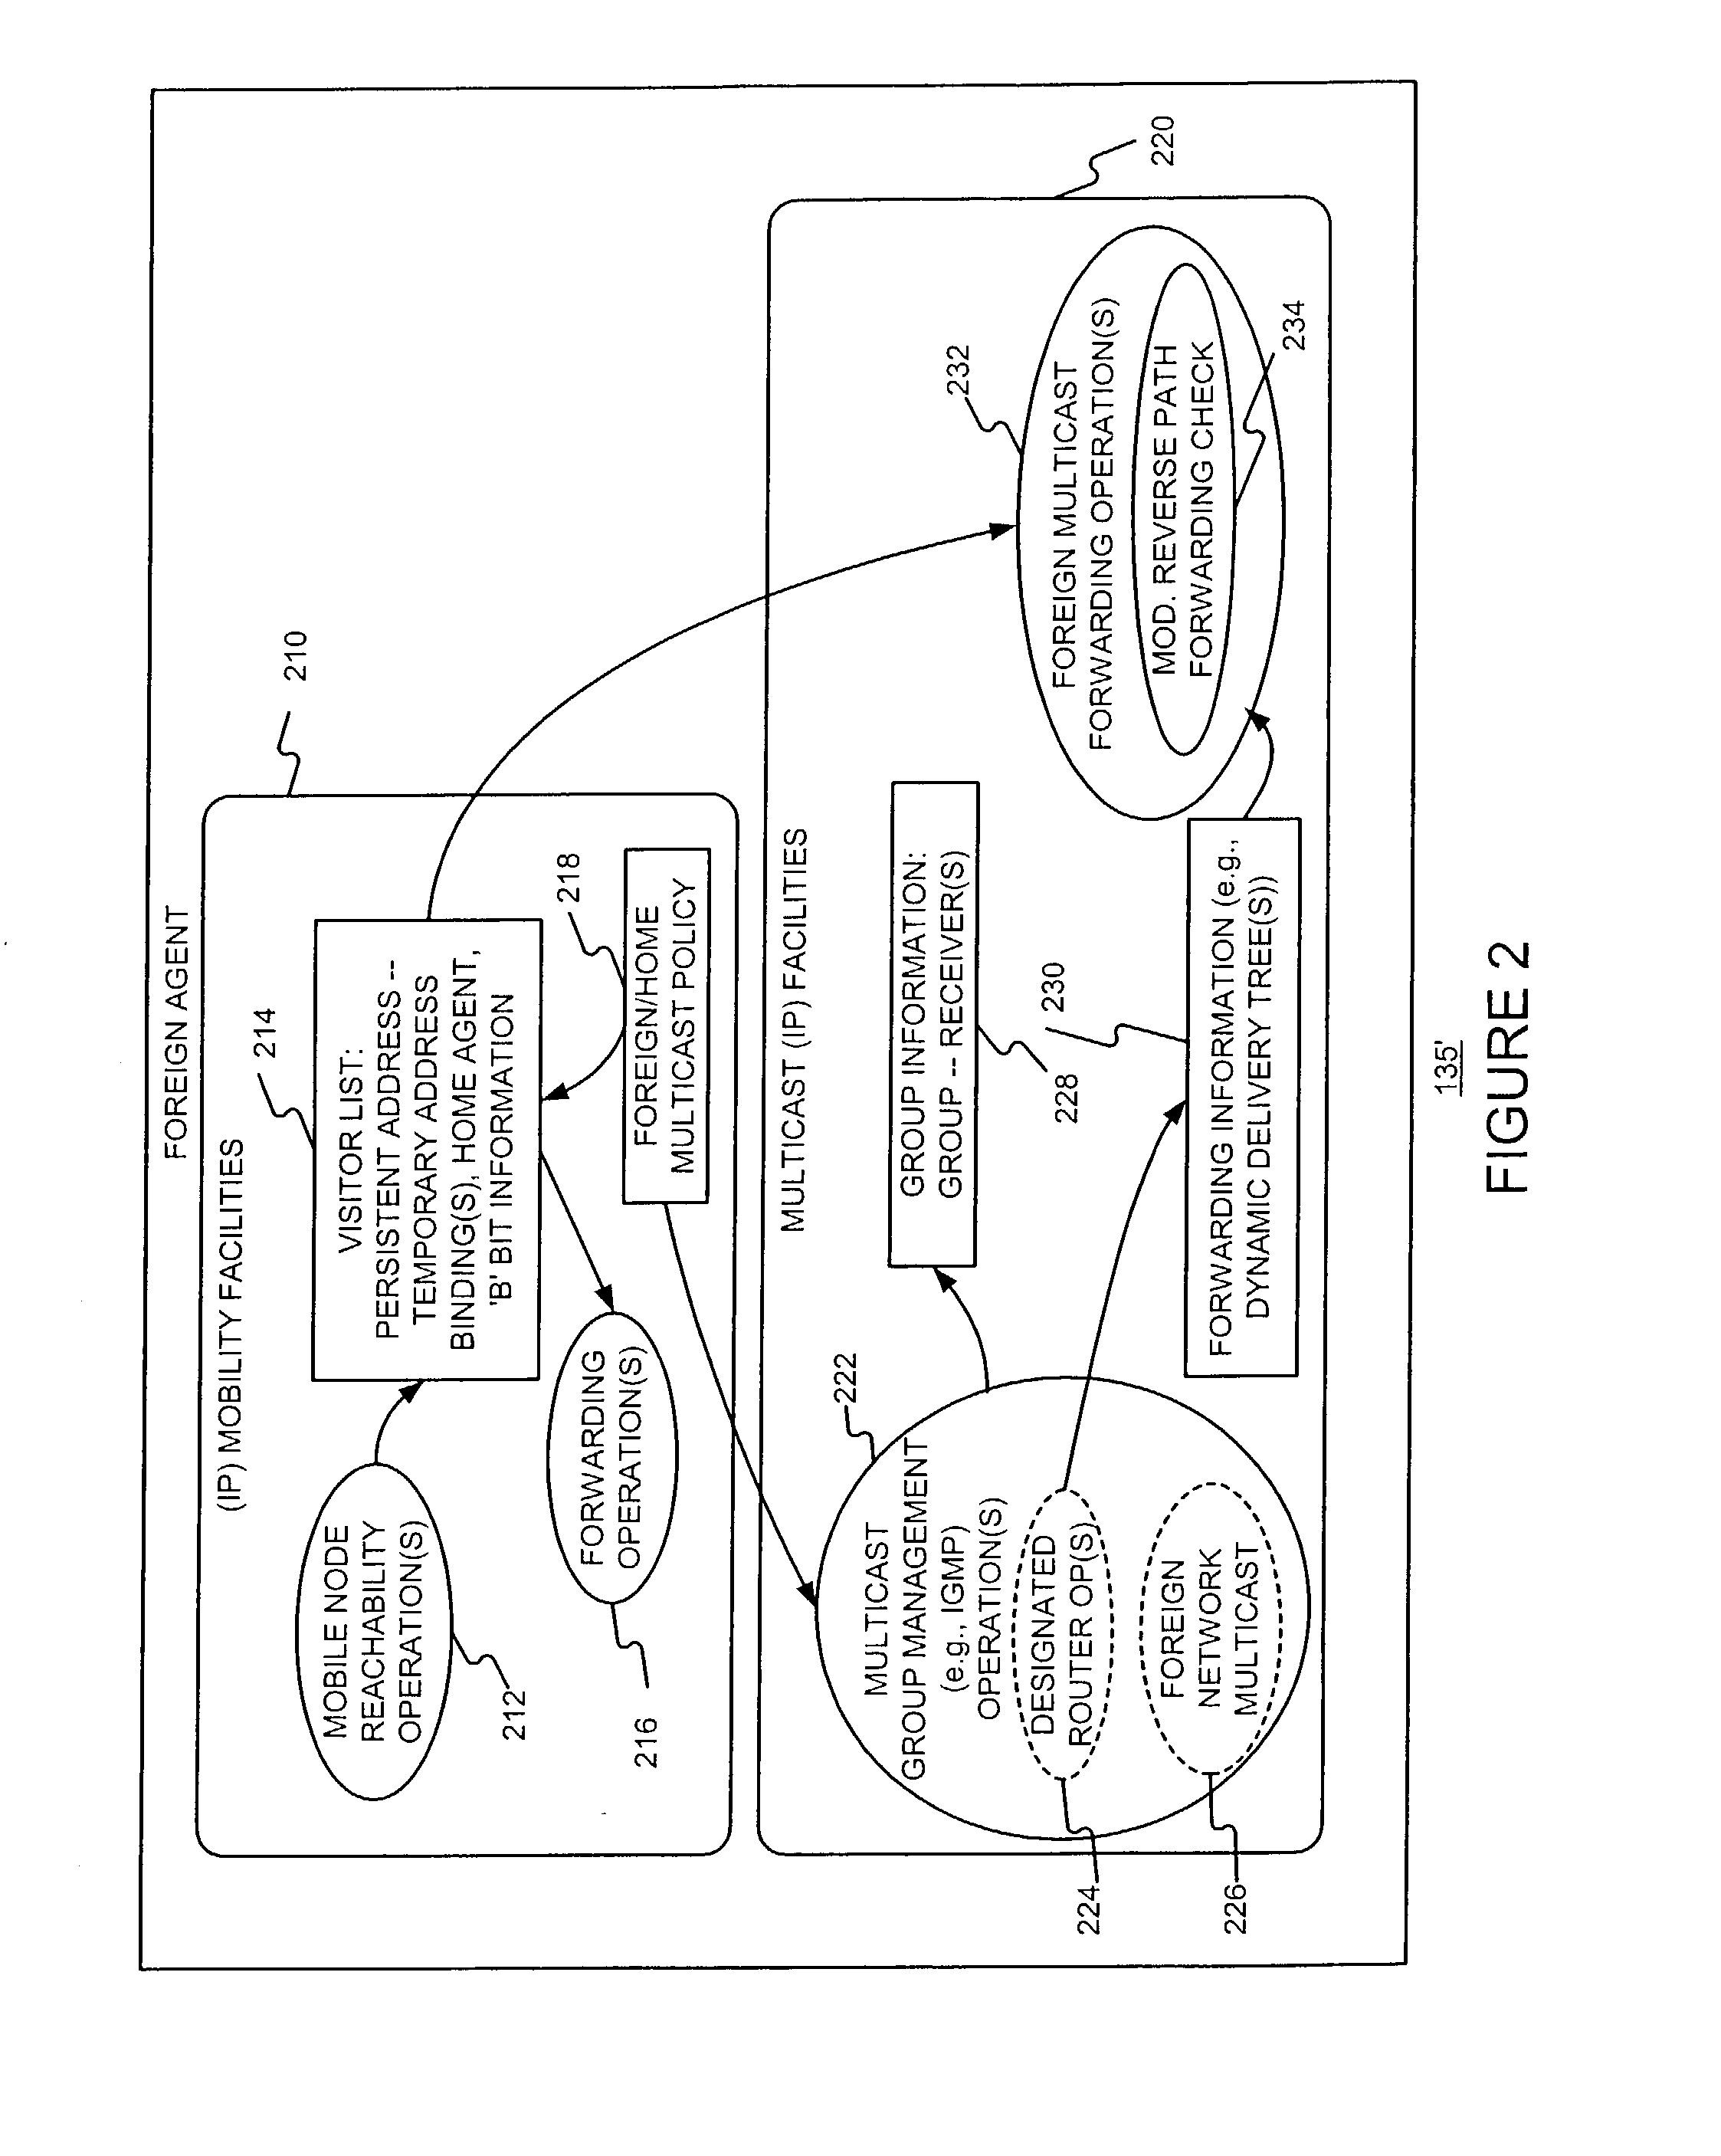 Enabling foreign network multicasting for a roaming mobile node, in a foreign network, using a persistent address